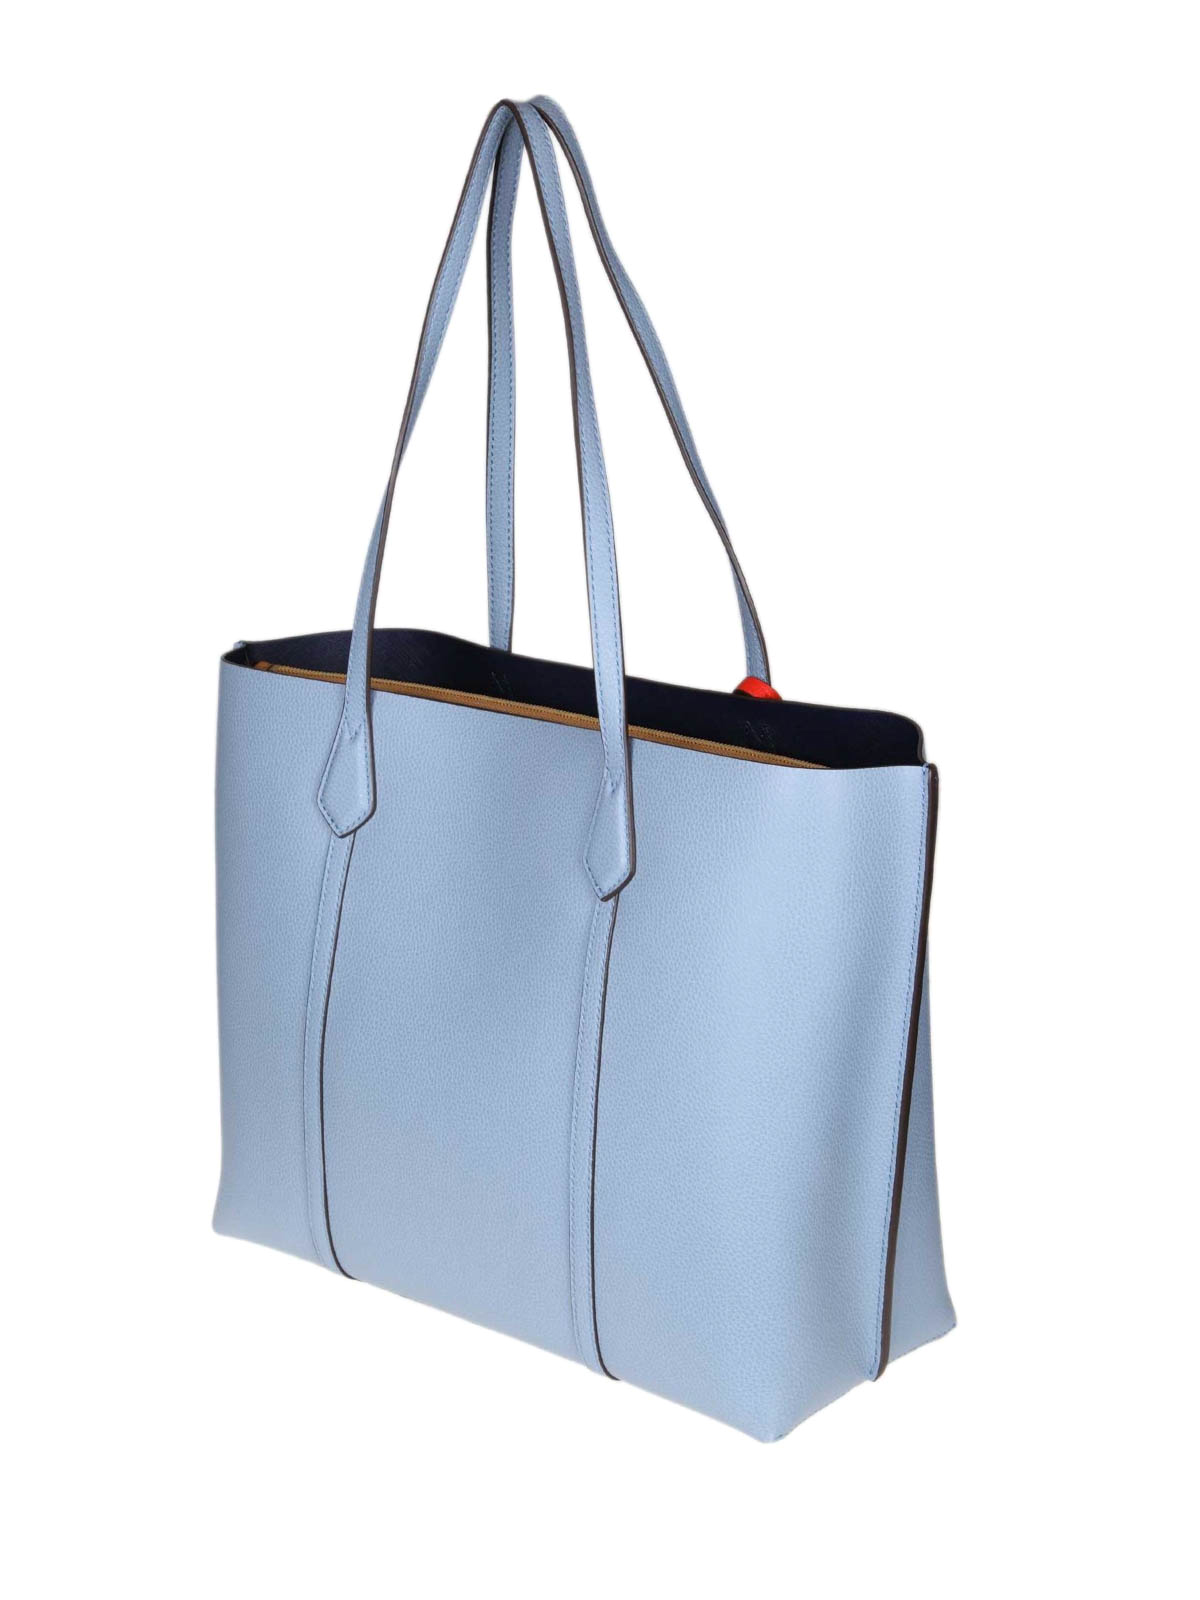 Totes bags Tory Burch - Perry triple compartment light blue tote